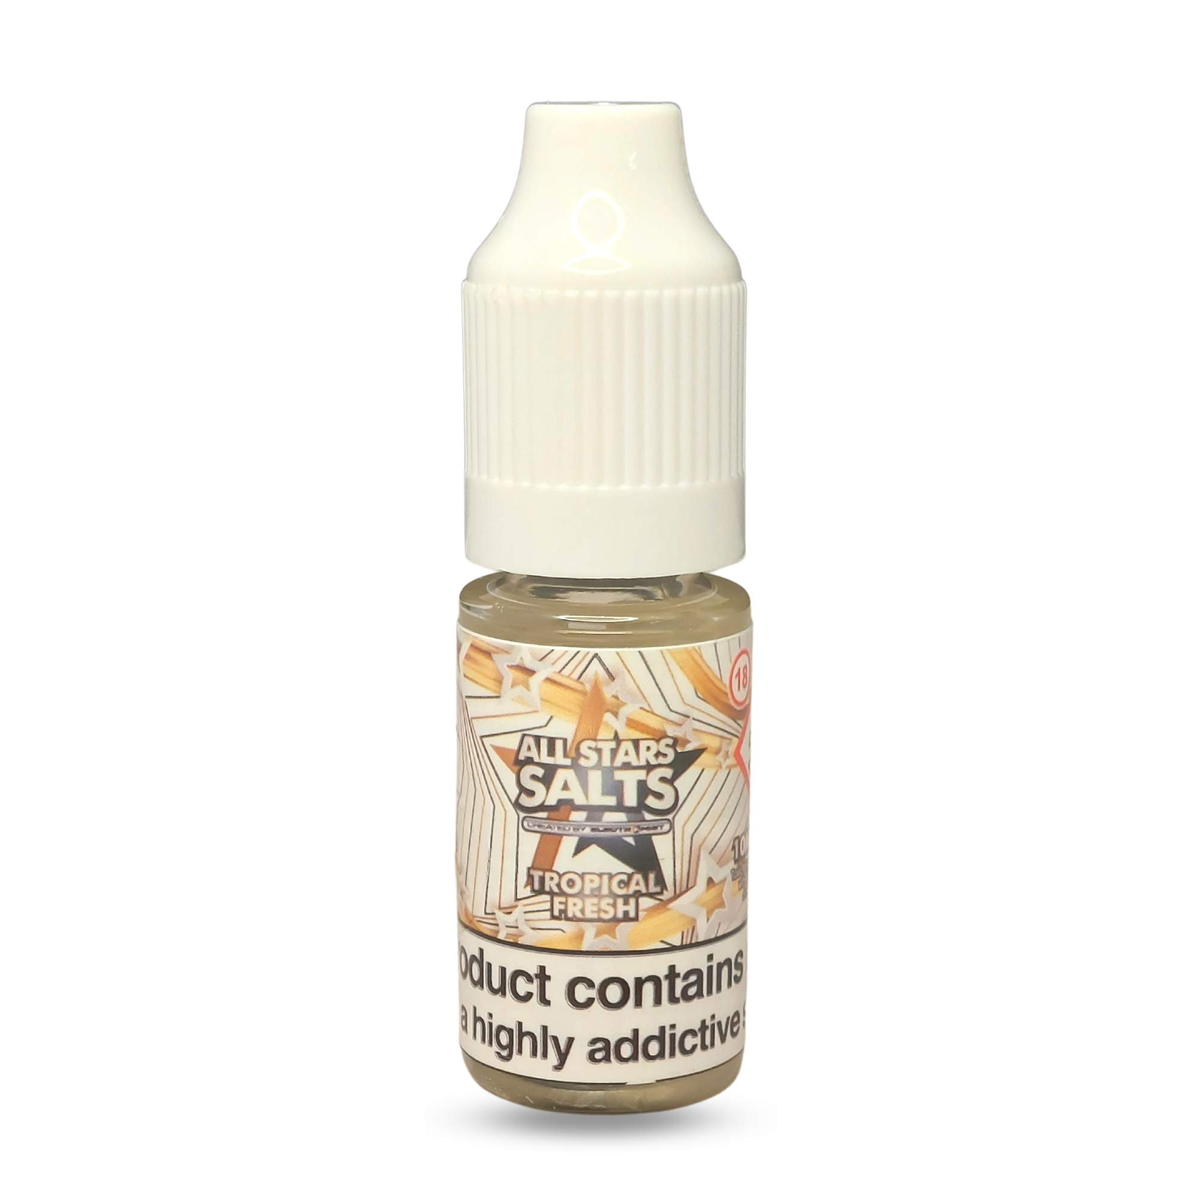 All Stars Salts from the vape brand you can trust, Electromist. Get your taste buds ready for a flavour sensation, Tropical Fresh. Nicotine Content: 6mg/12mg/18mg Products may contain nicotine. For over 18s Only ejuice, vape pen, eliquid, e cigarette, 10ml, vaping, cloud, PG, VG, 60/40, vape liquid, Flavour, TPD